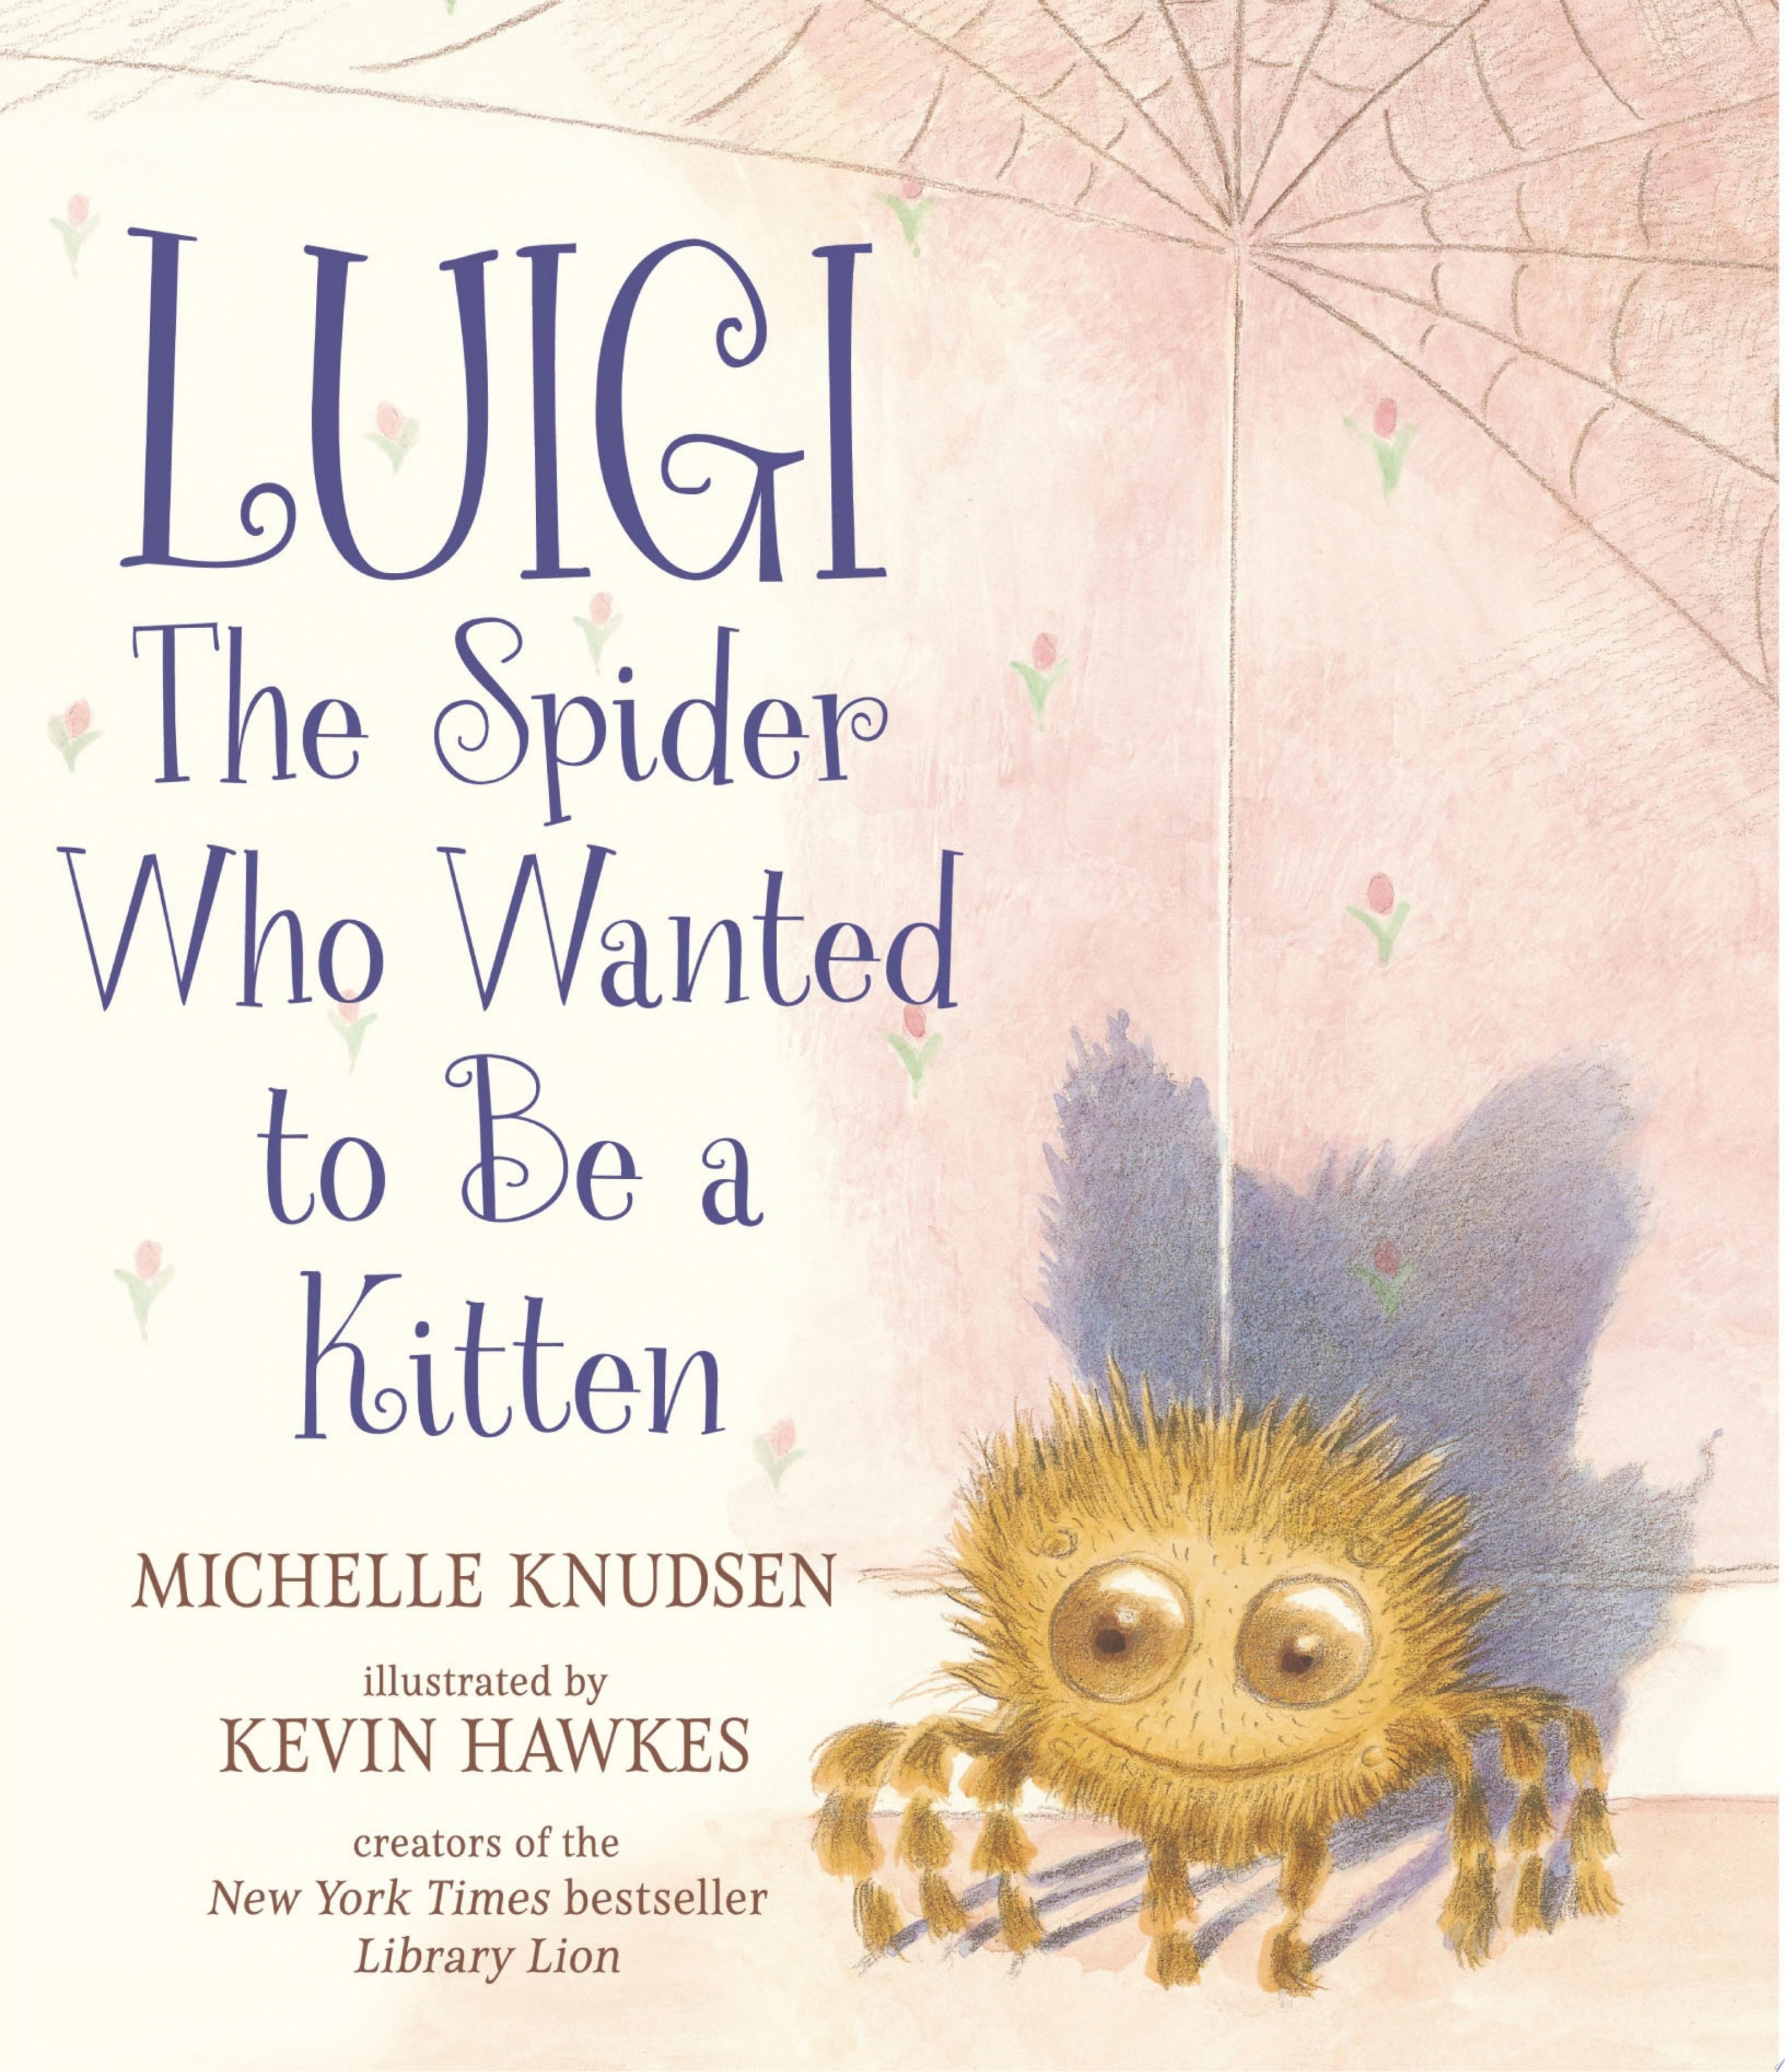 Image for "Luigi, the Spider Who Wanted to Be a Kitten"